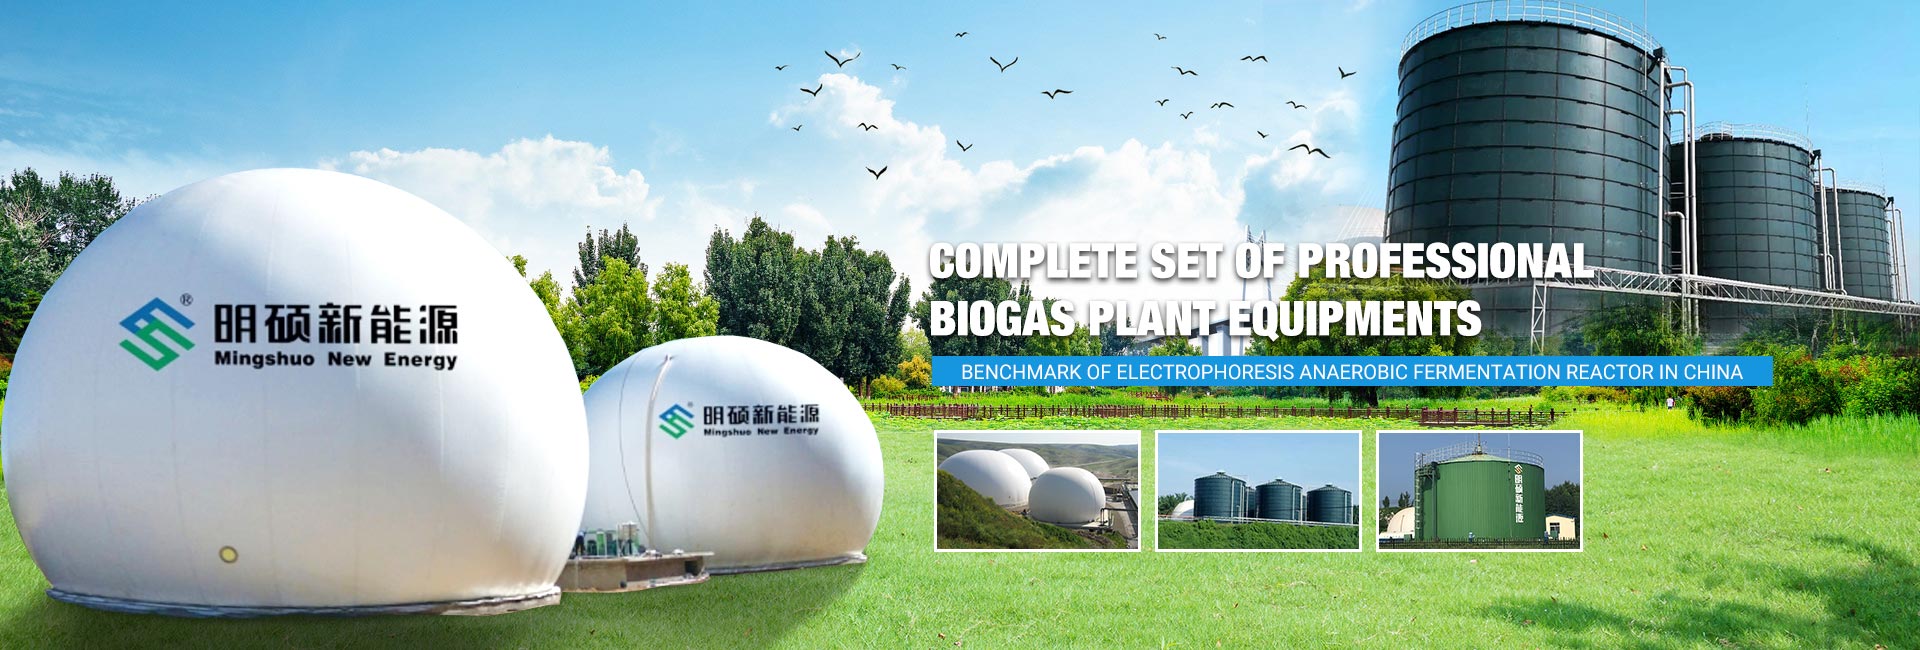 Complete Set of Professional Biogas Plant Equipments